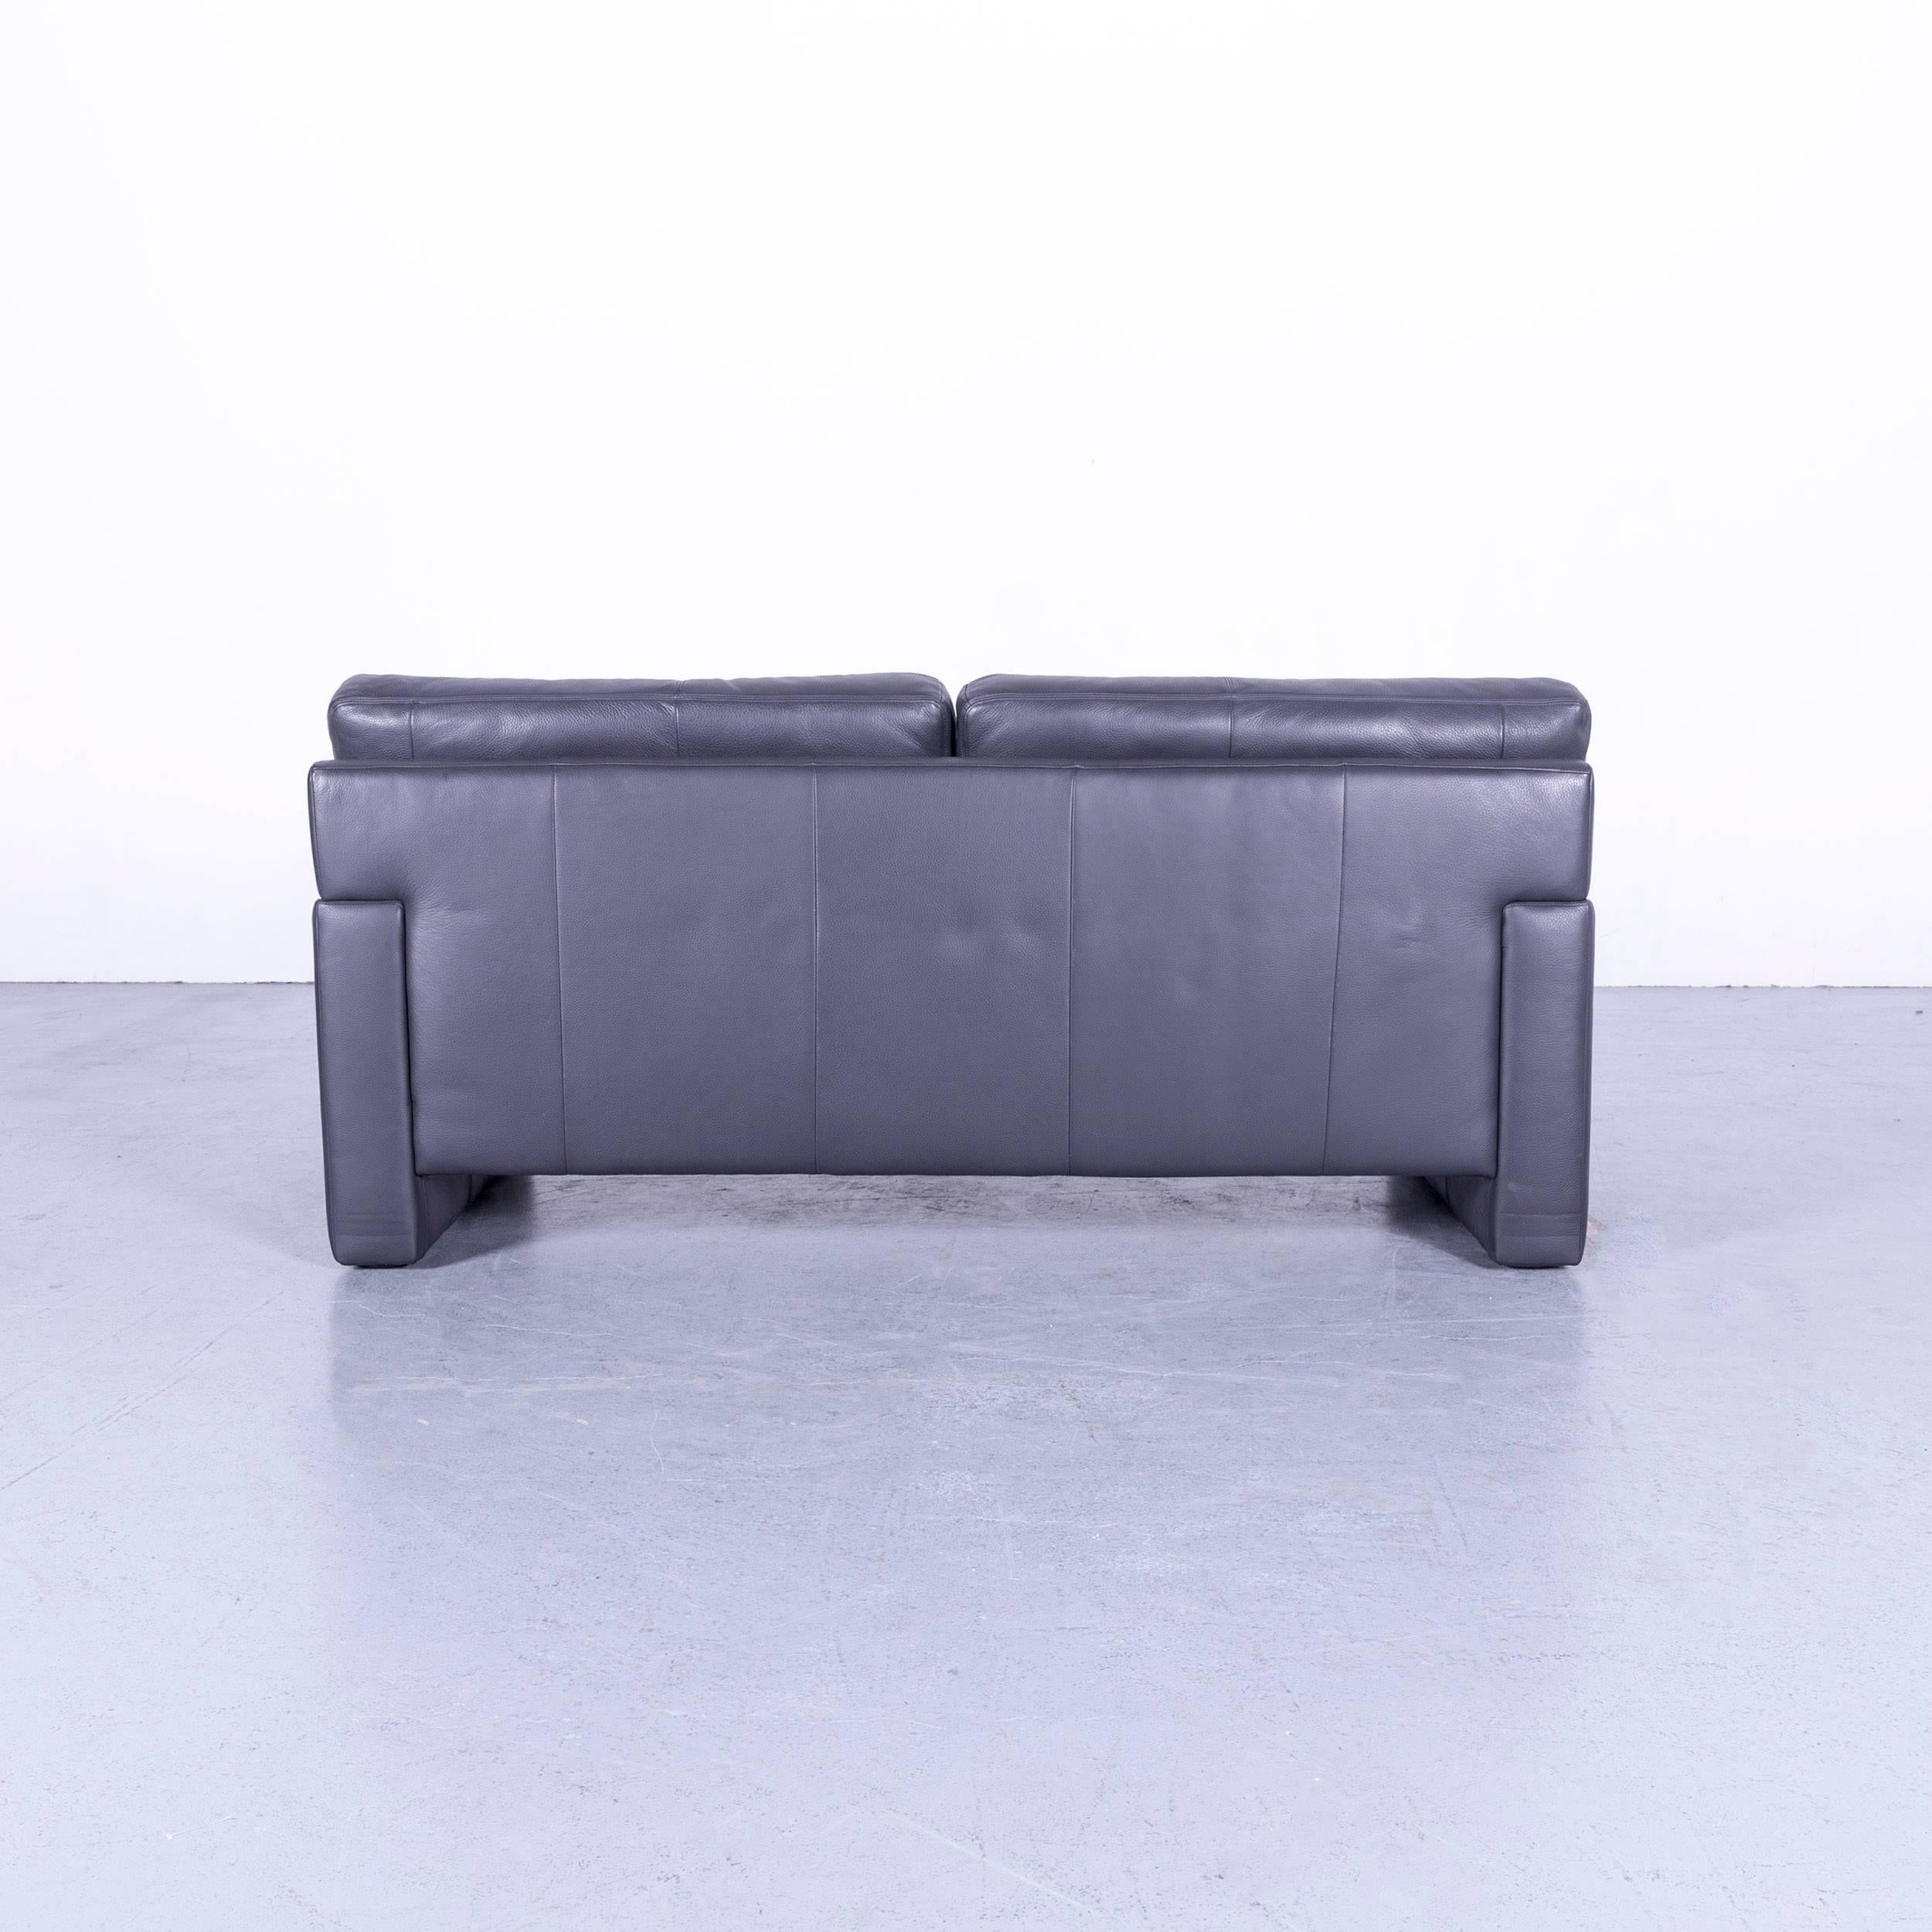 Erpo CL 300 Sofa Set of Two Leather Grey Three/Two-Seat Couch 8